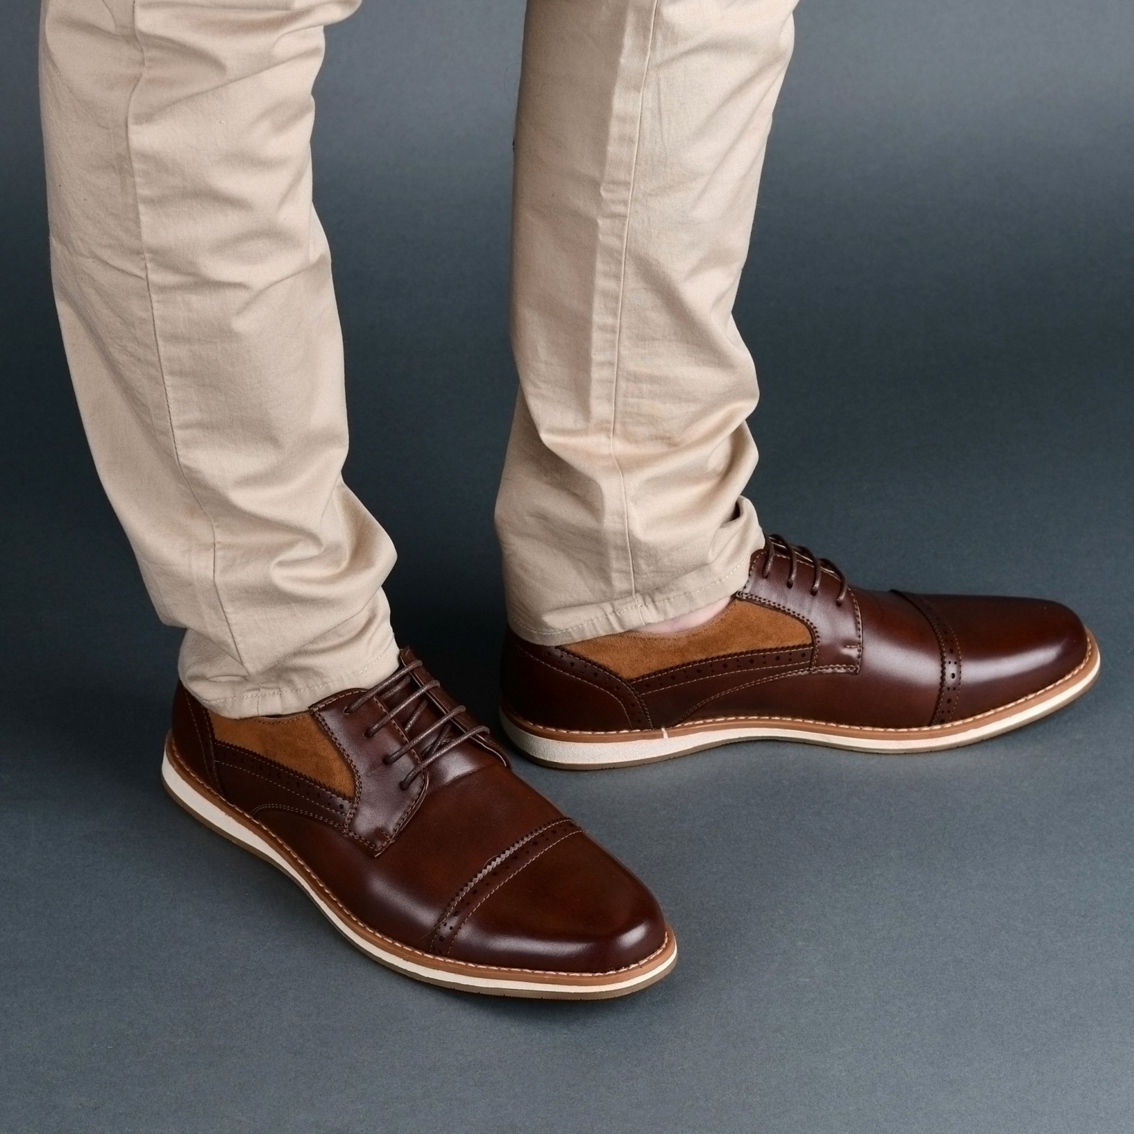 Vance Co. Griff Cap Toe Brogue Derby - Image 5 of 5